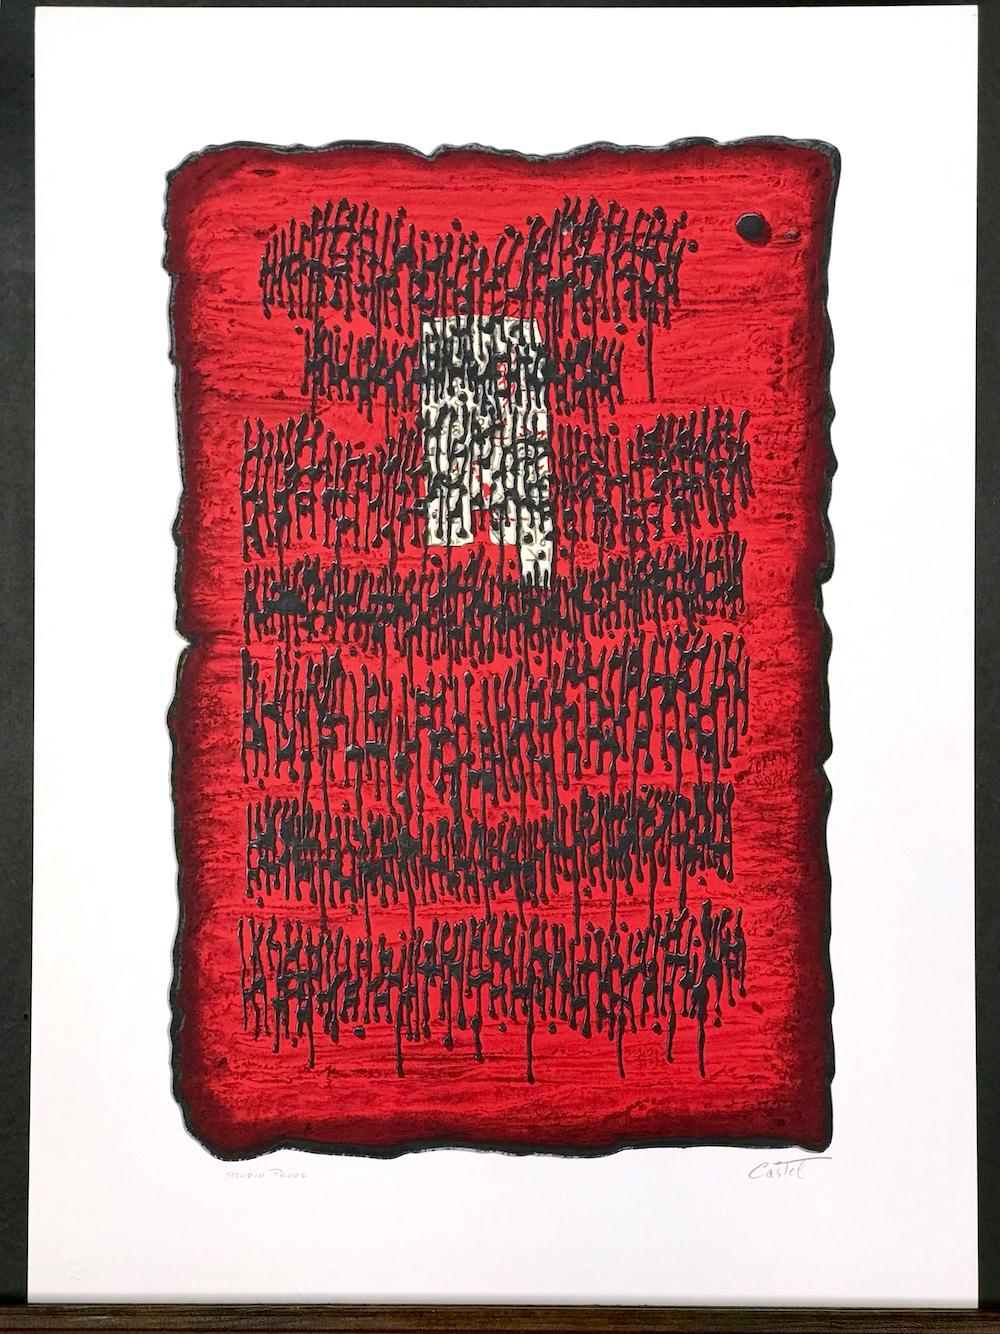 PROPHESY Signed Lithograph, Red Black Abstract, Ancient Hebrew, Stone Tablet - Print by Moshe Castel